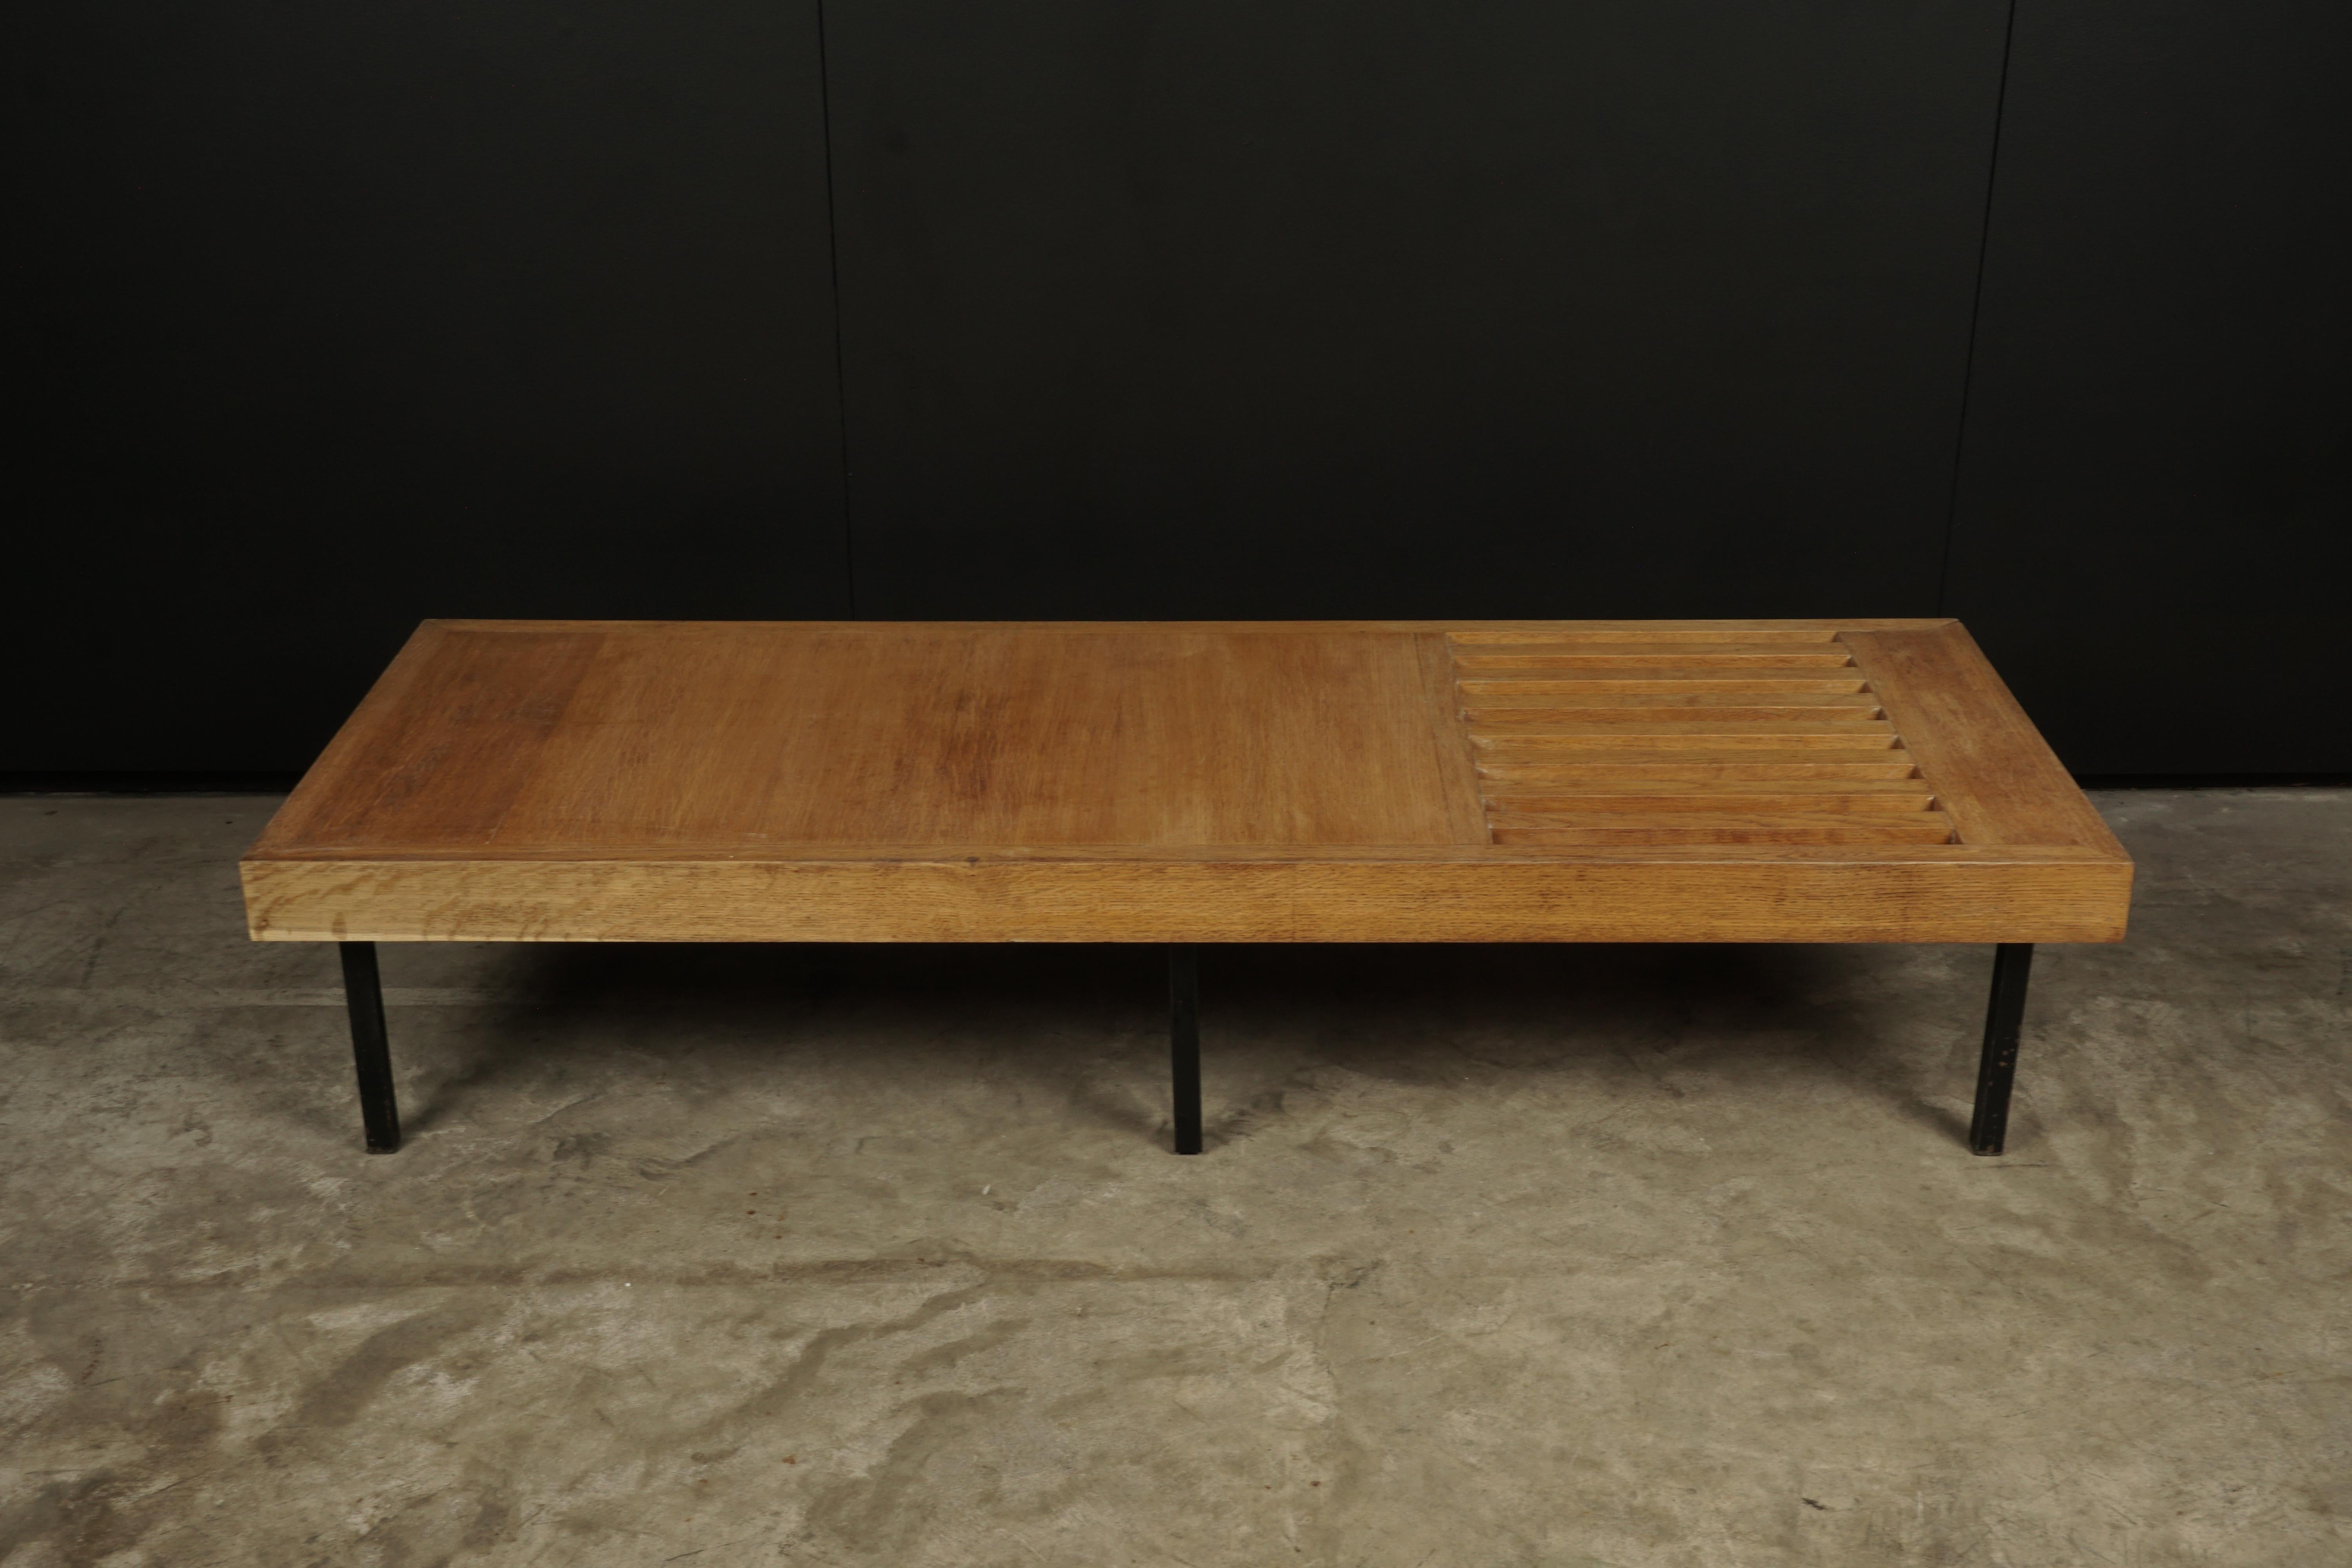 Vintage oak coffee table from France, 1960s. Rare slatted model with metal feet. Light wear and patina.